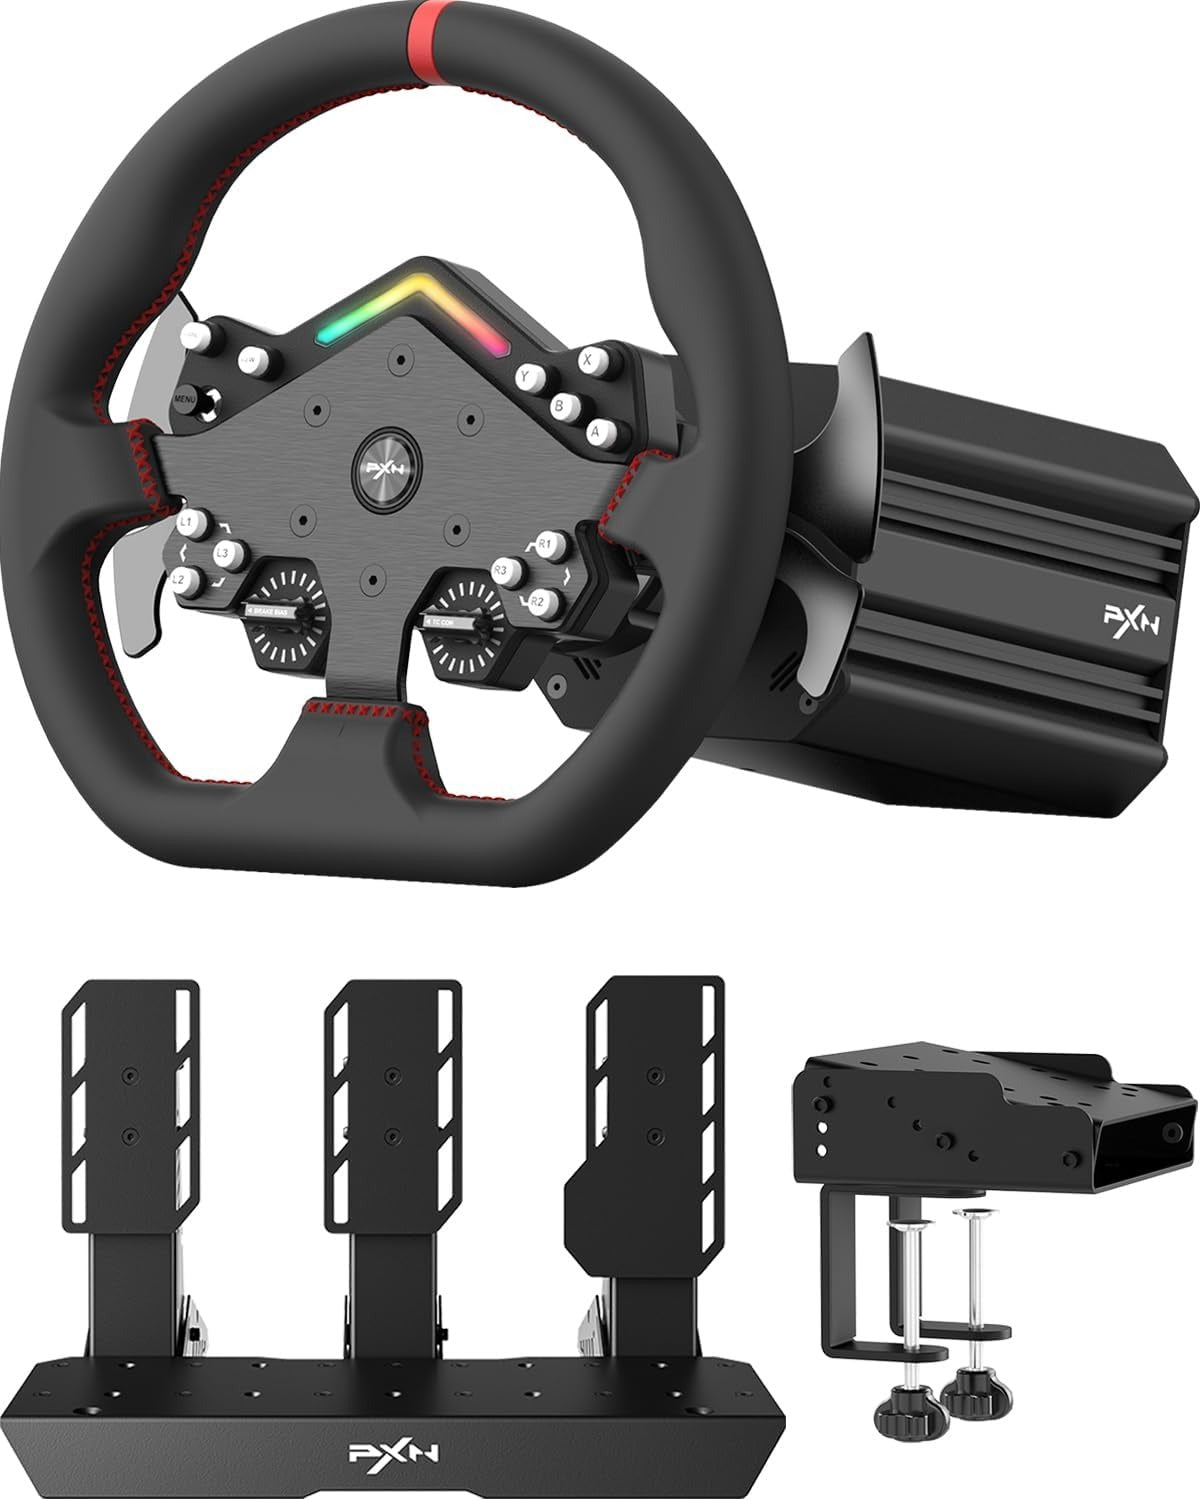 PXN V12 Lite RGB Racing Simulator Gaming Bundle with PD HM Pedal, V12 DDL DD & Servo 6Nm FFB Wheel Base, W DS Steering Wheel and Z9 Desktop Mounting Bracket with Programmable Buttons & Comfortable Grips for PC, PS4 Xbox